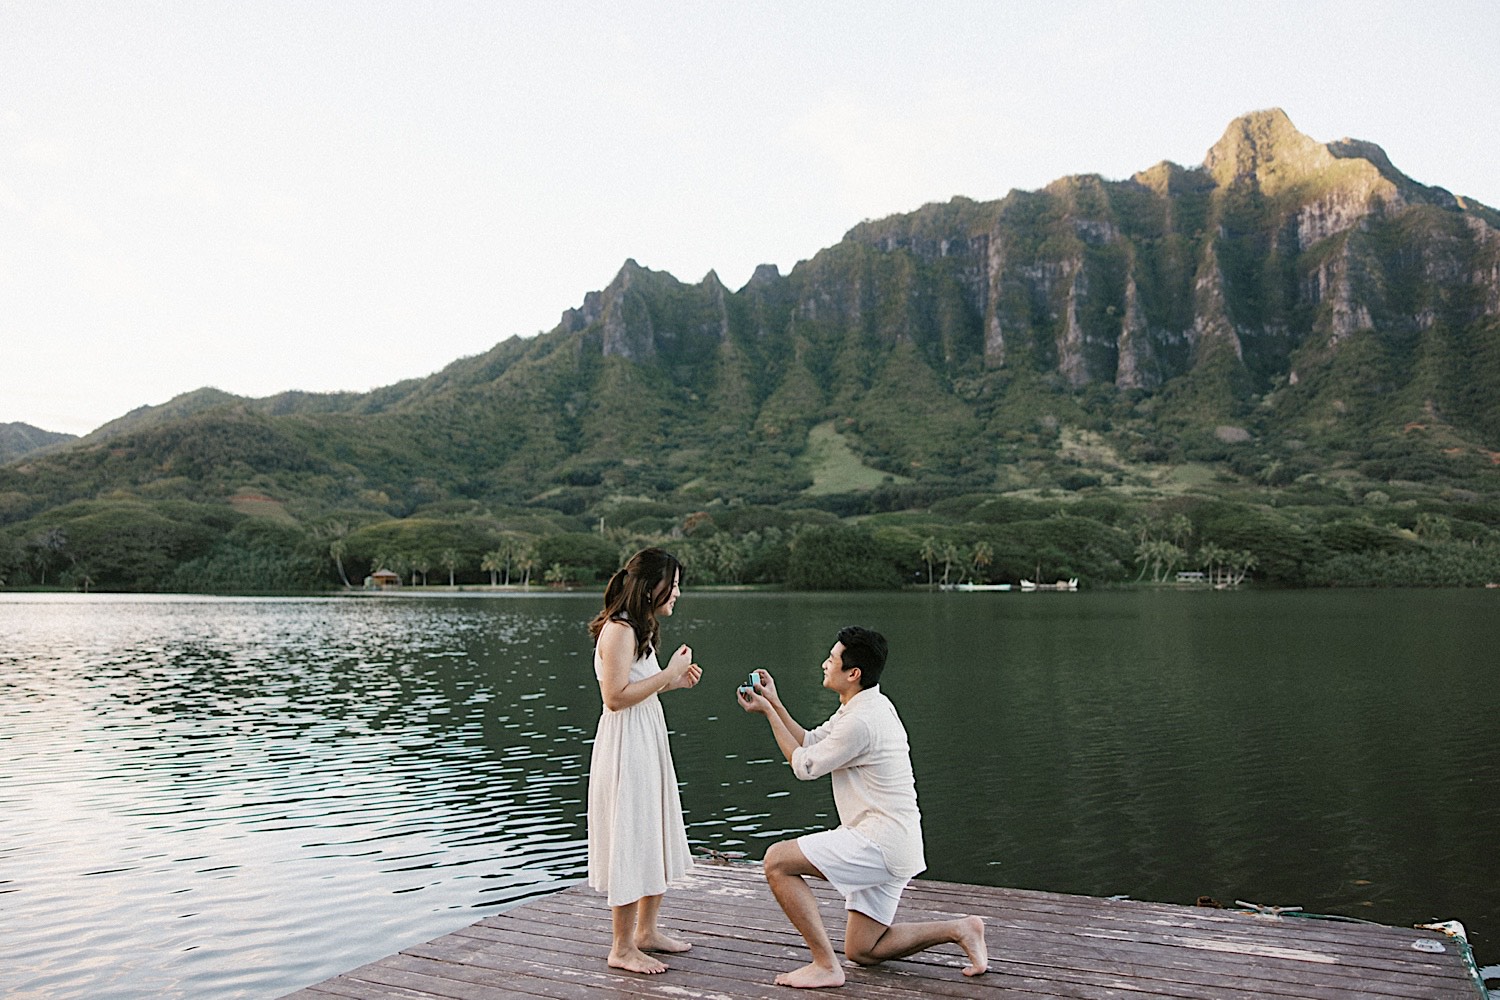 A woman smiles as a man gets down on one knee in front of her for their proposal at secret lake on Oahu